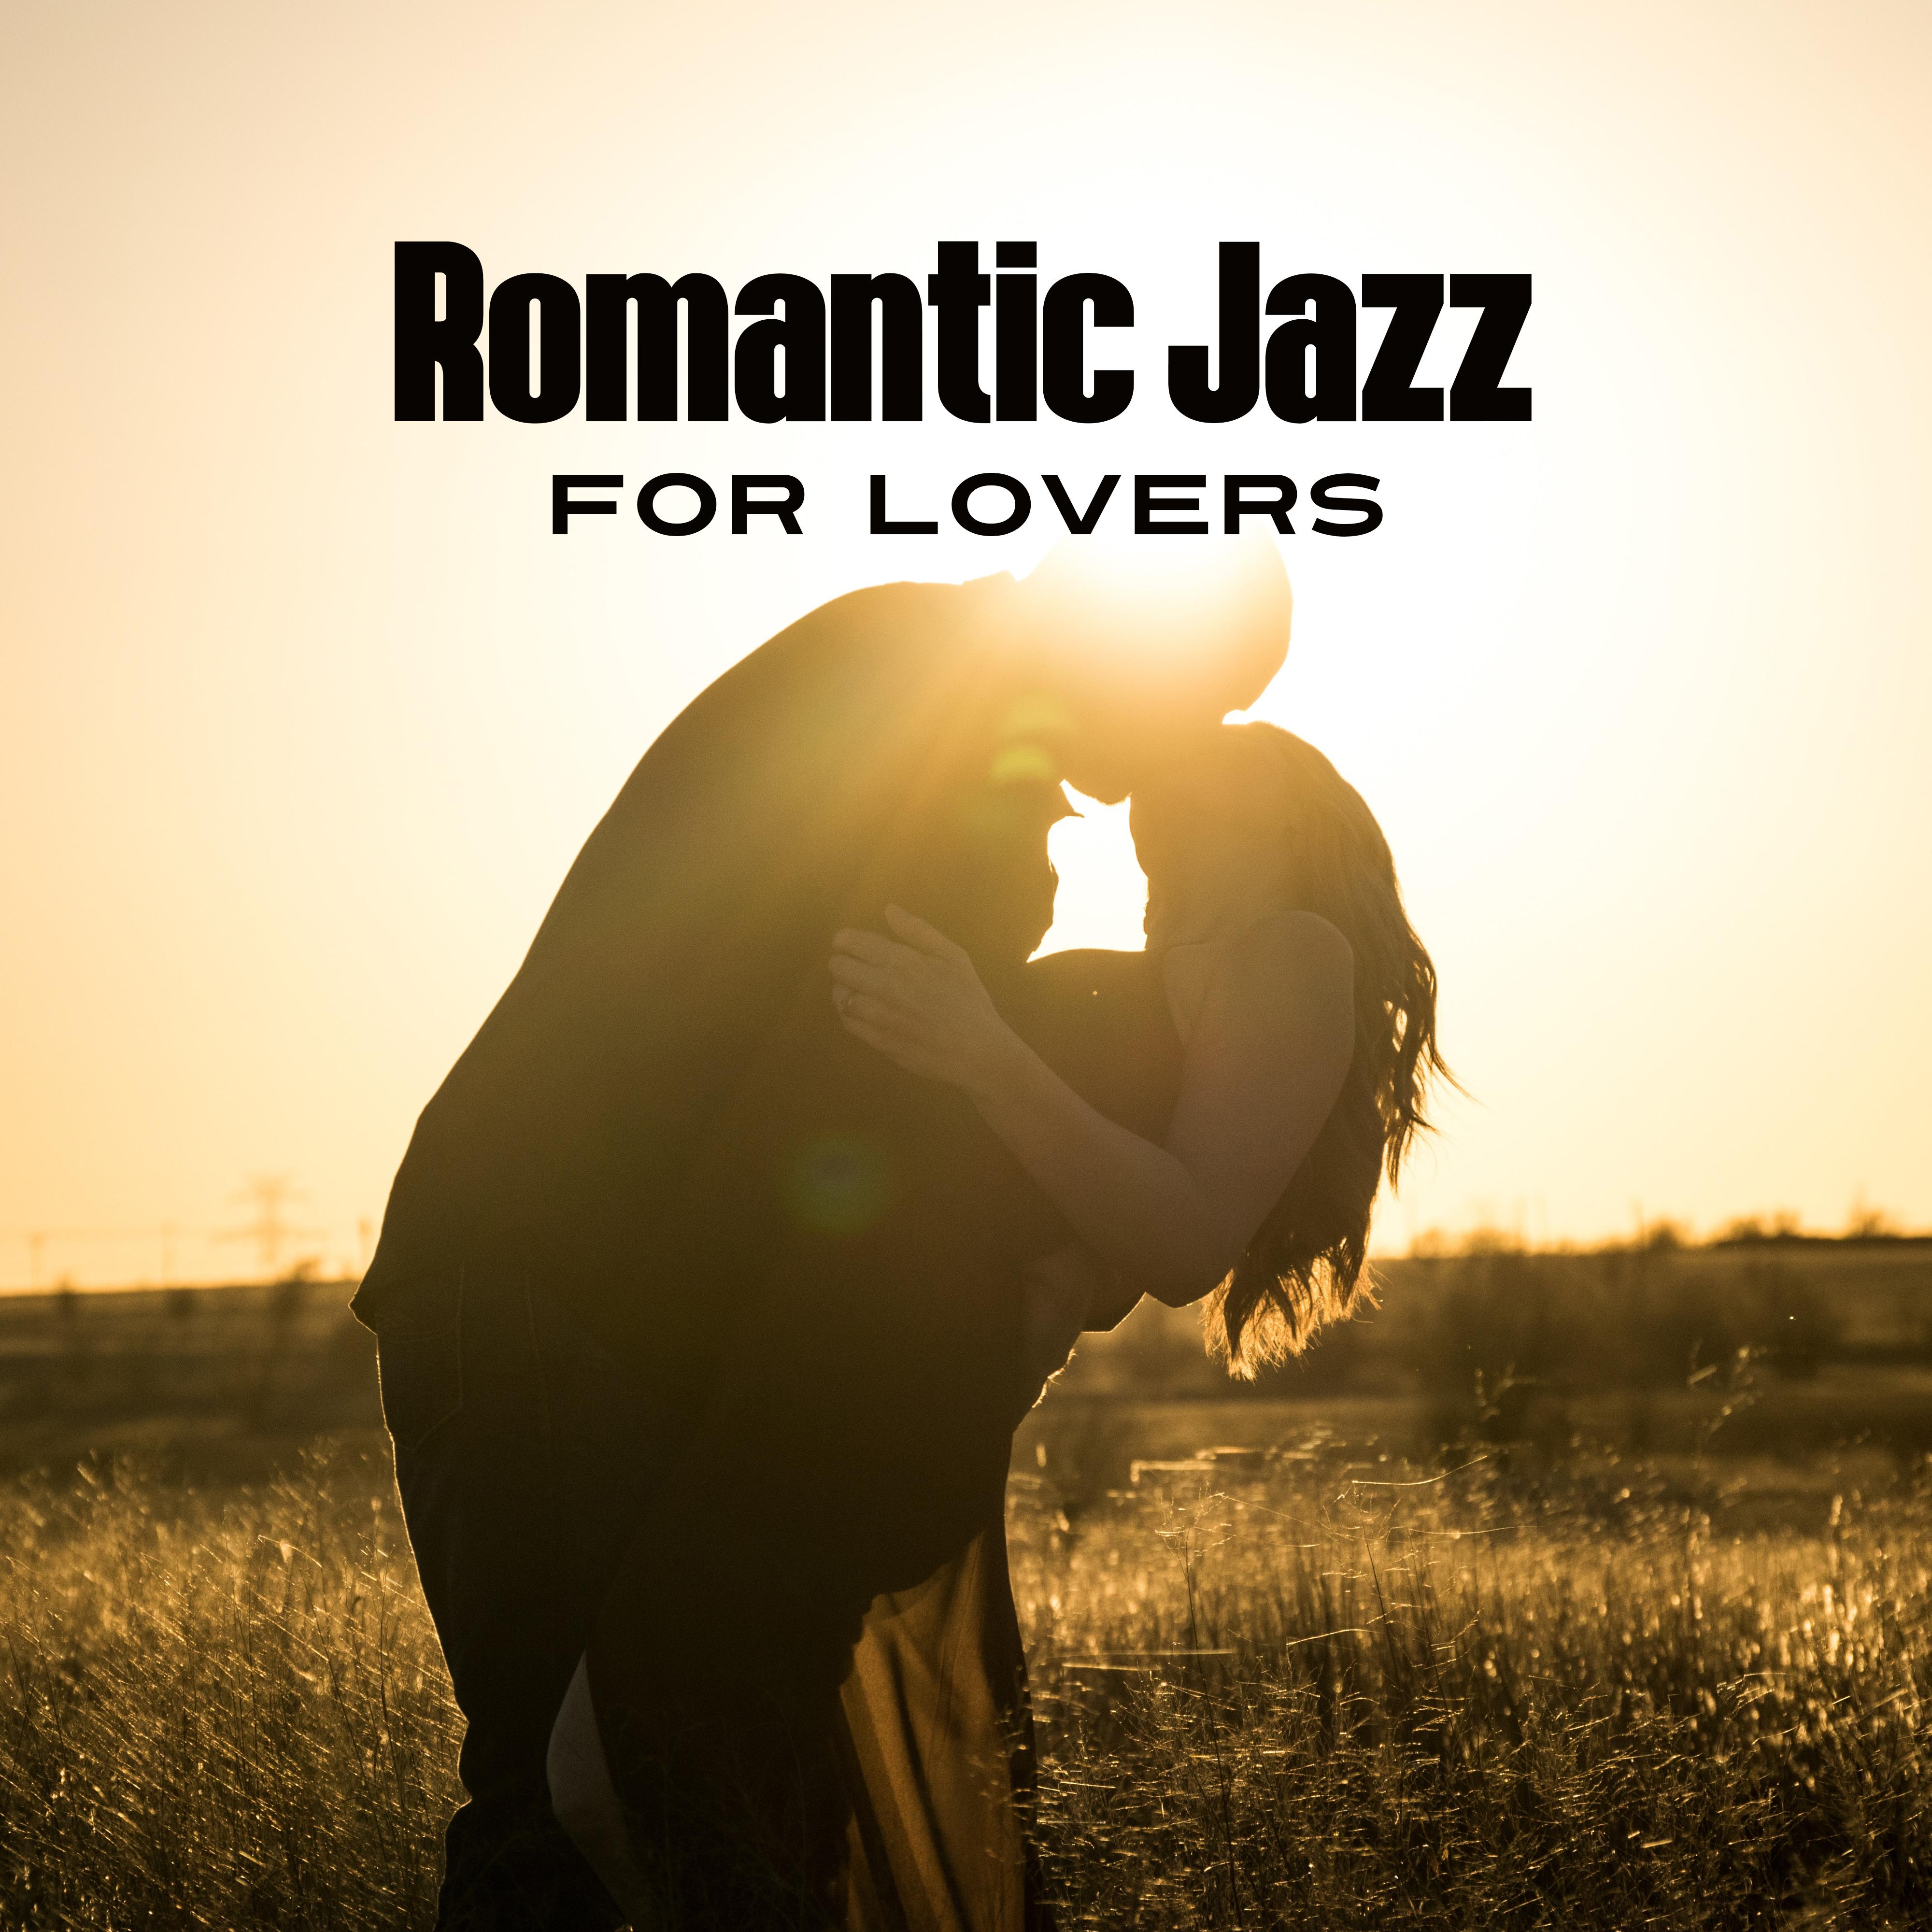 Romantic Jazz for Lovers  Smooth Sounds, Romantic Music, Peaceful Jazz for Lovers, Instrumental Jazz, Moonlight Note